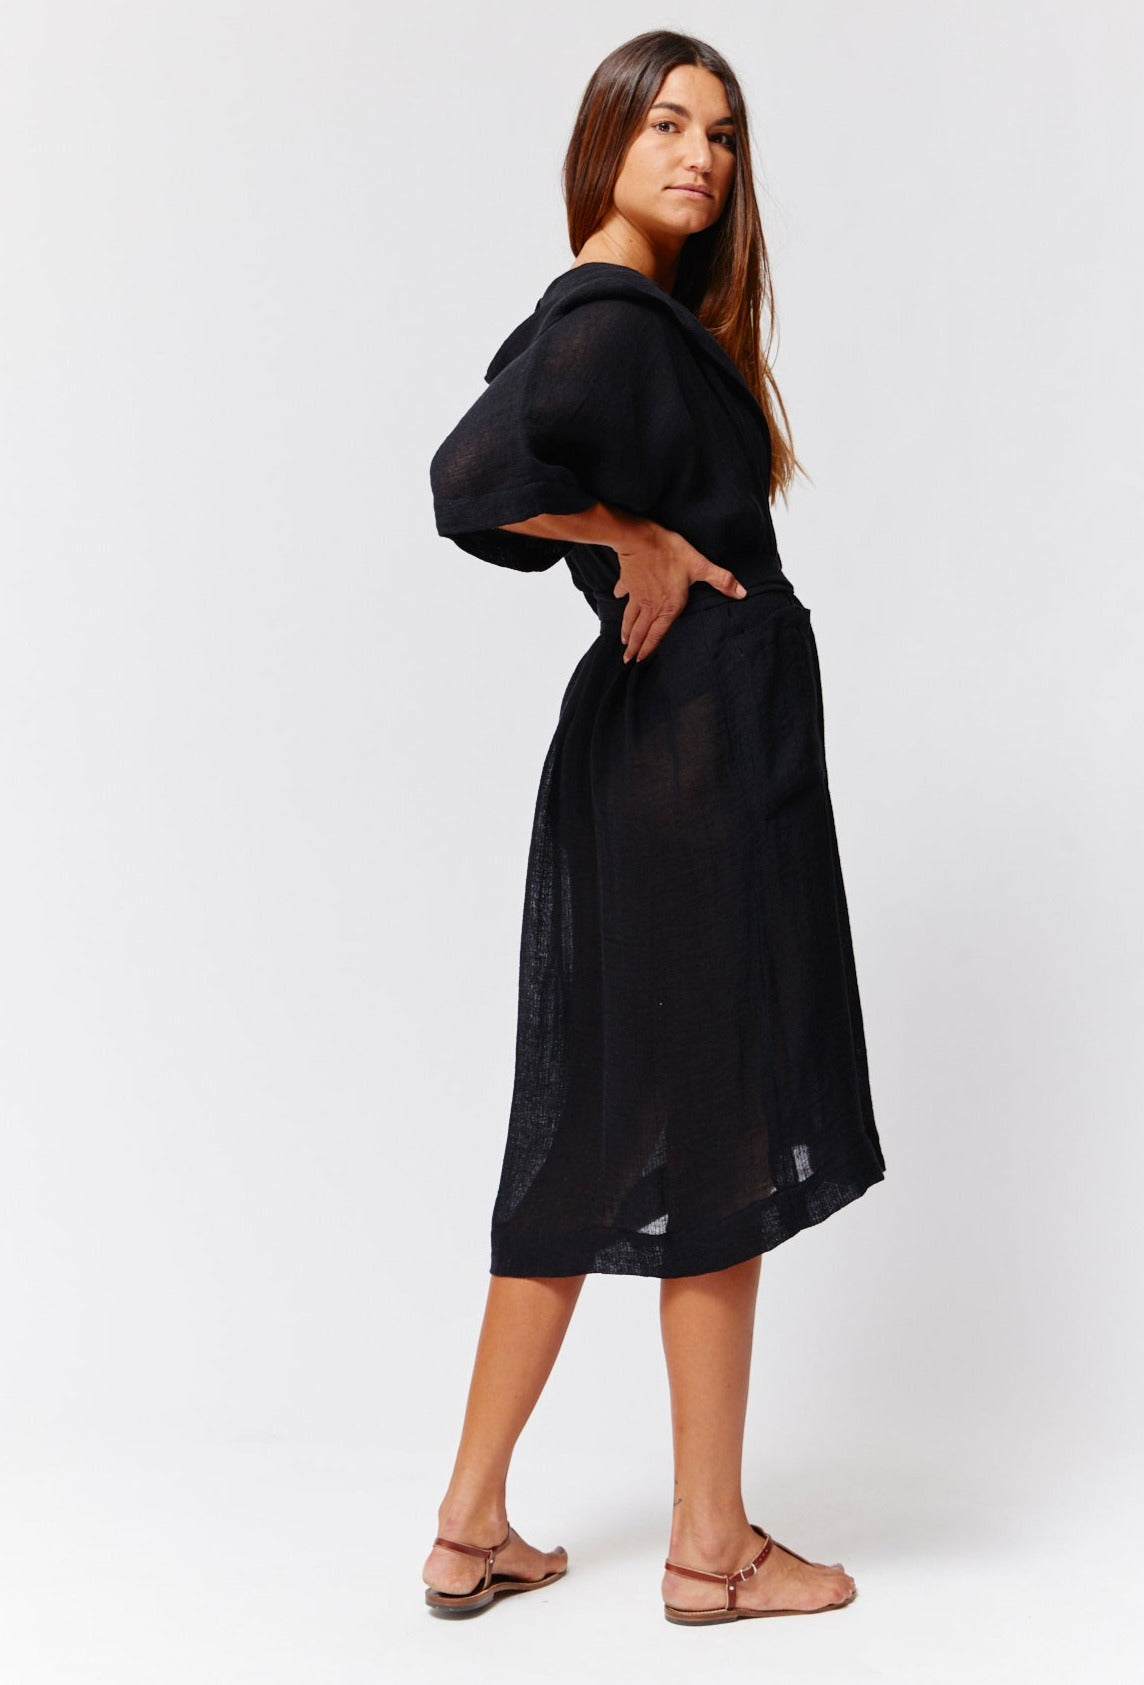 THE HOODED DRESSING GOWN in BLACK ORGANIC GAUZE